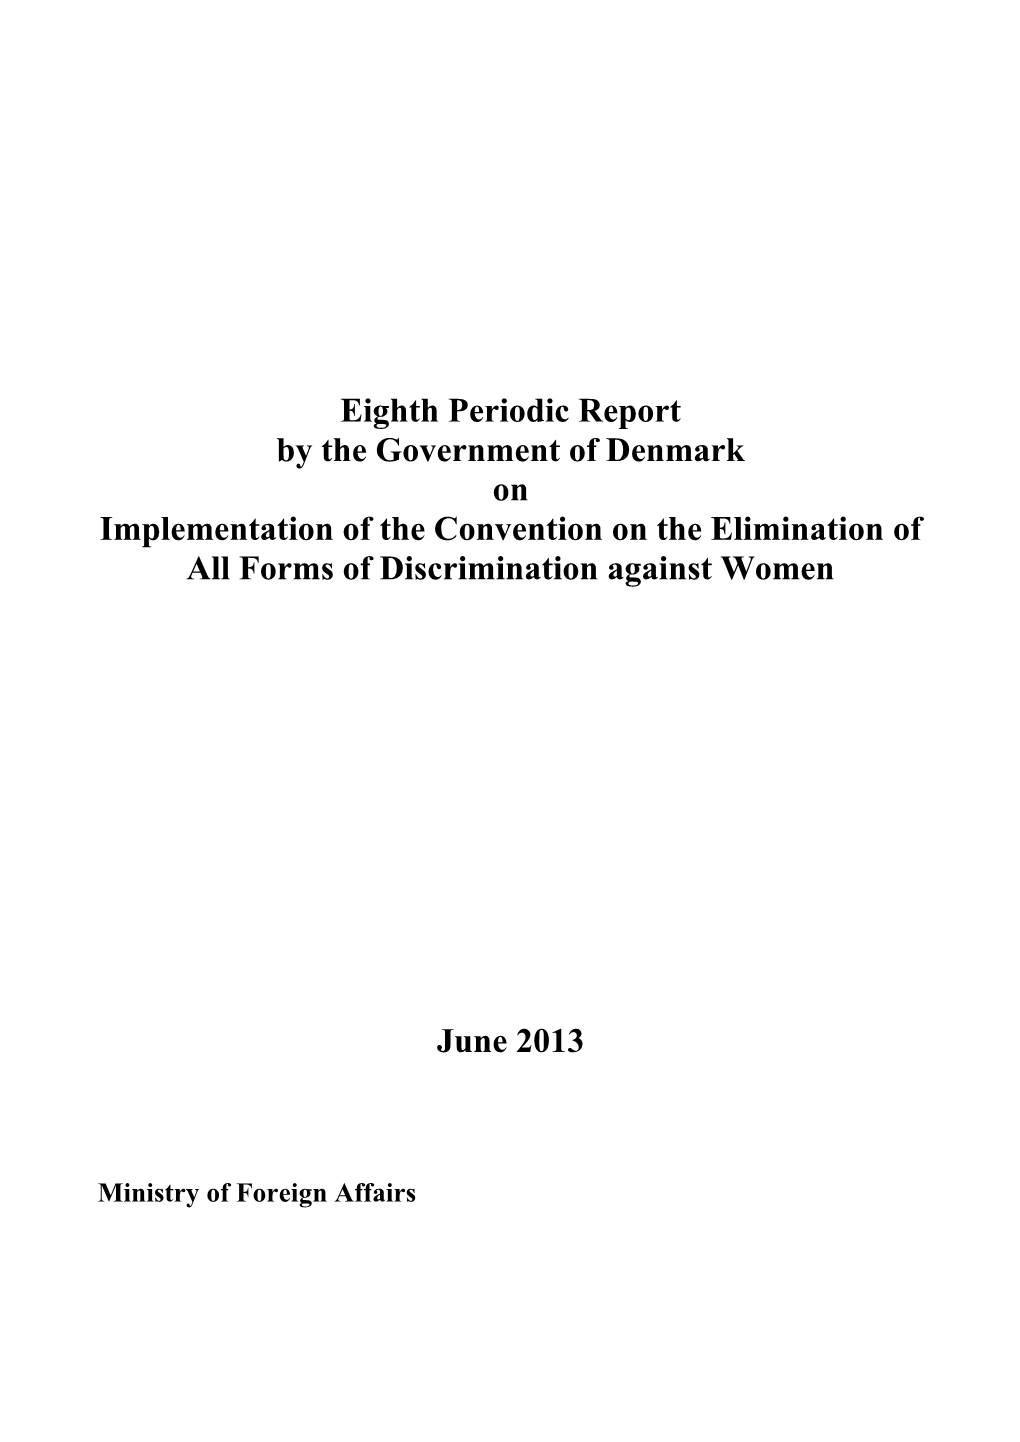 Eighth Periodic Report by the Government of Denmark on Implementation of the Convention on the Elimination of All Forms of Discrimination Against Women